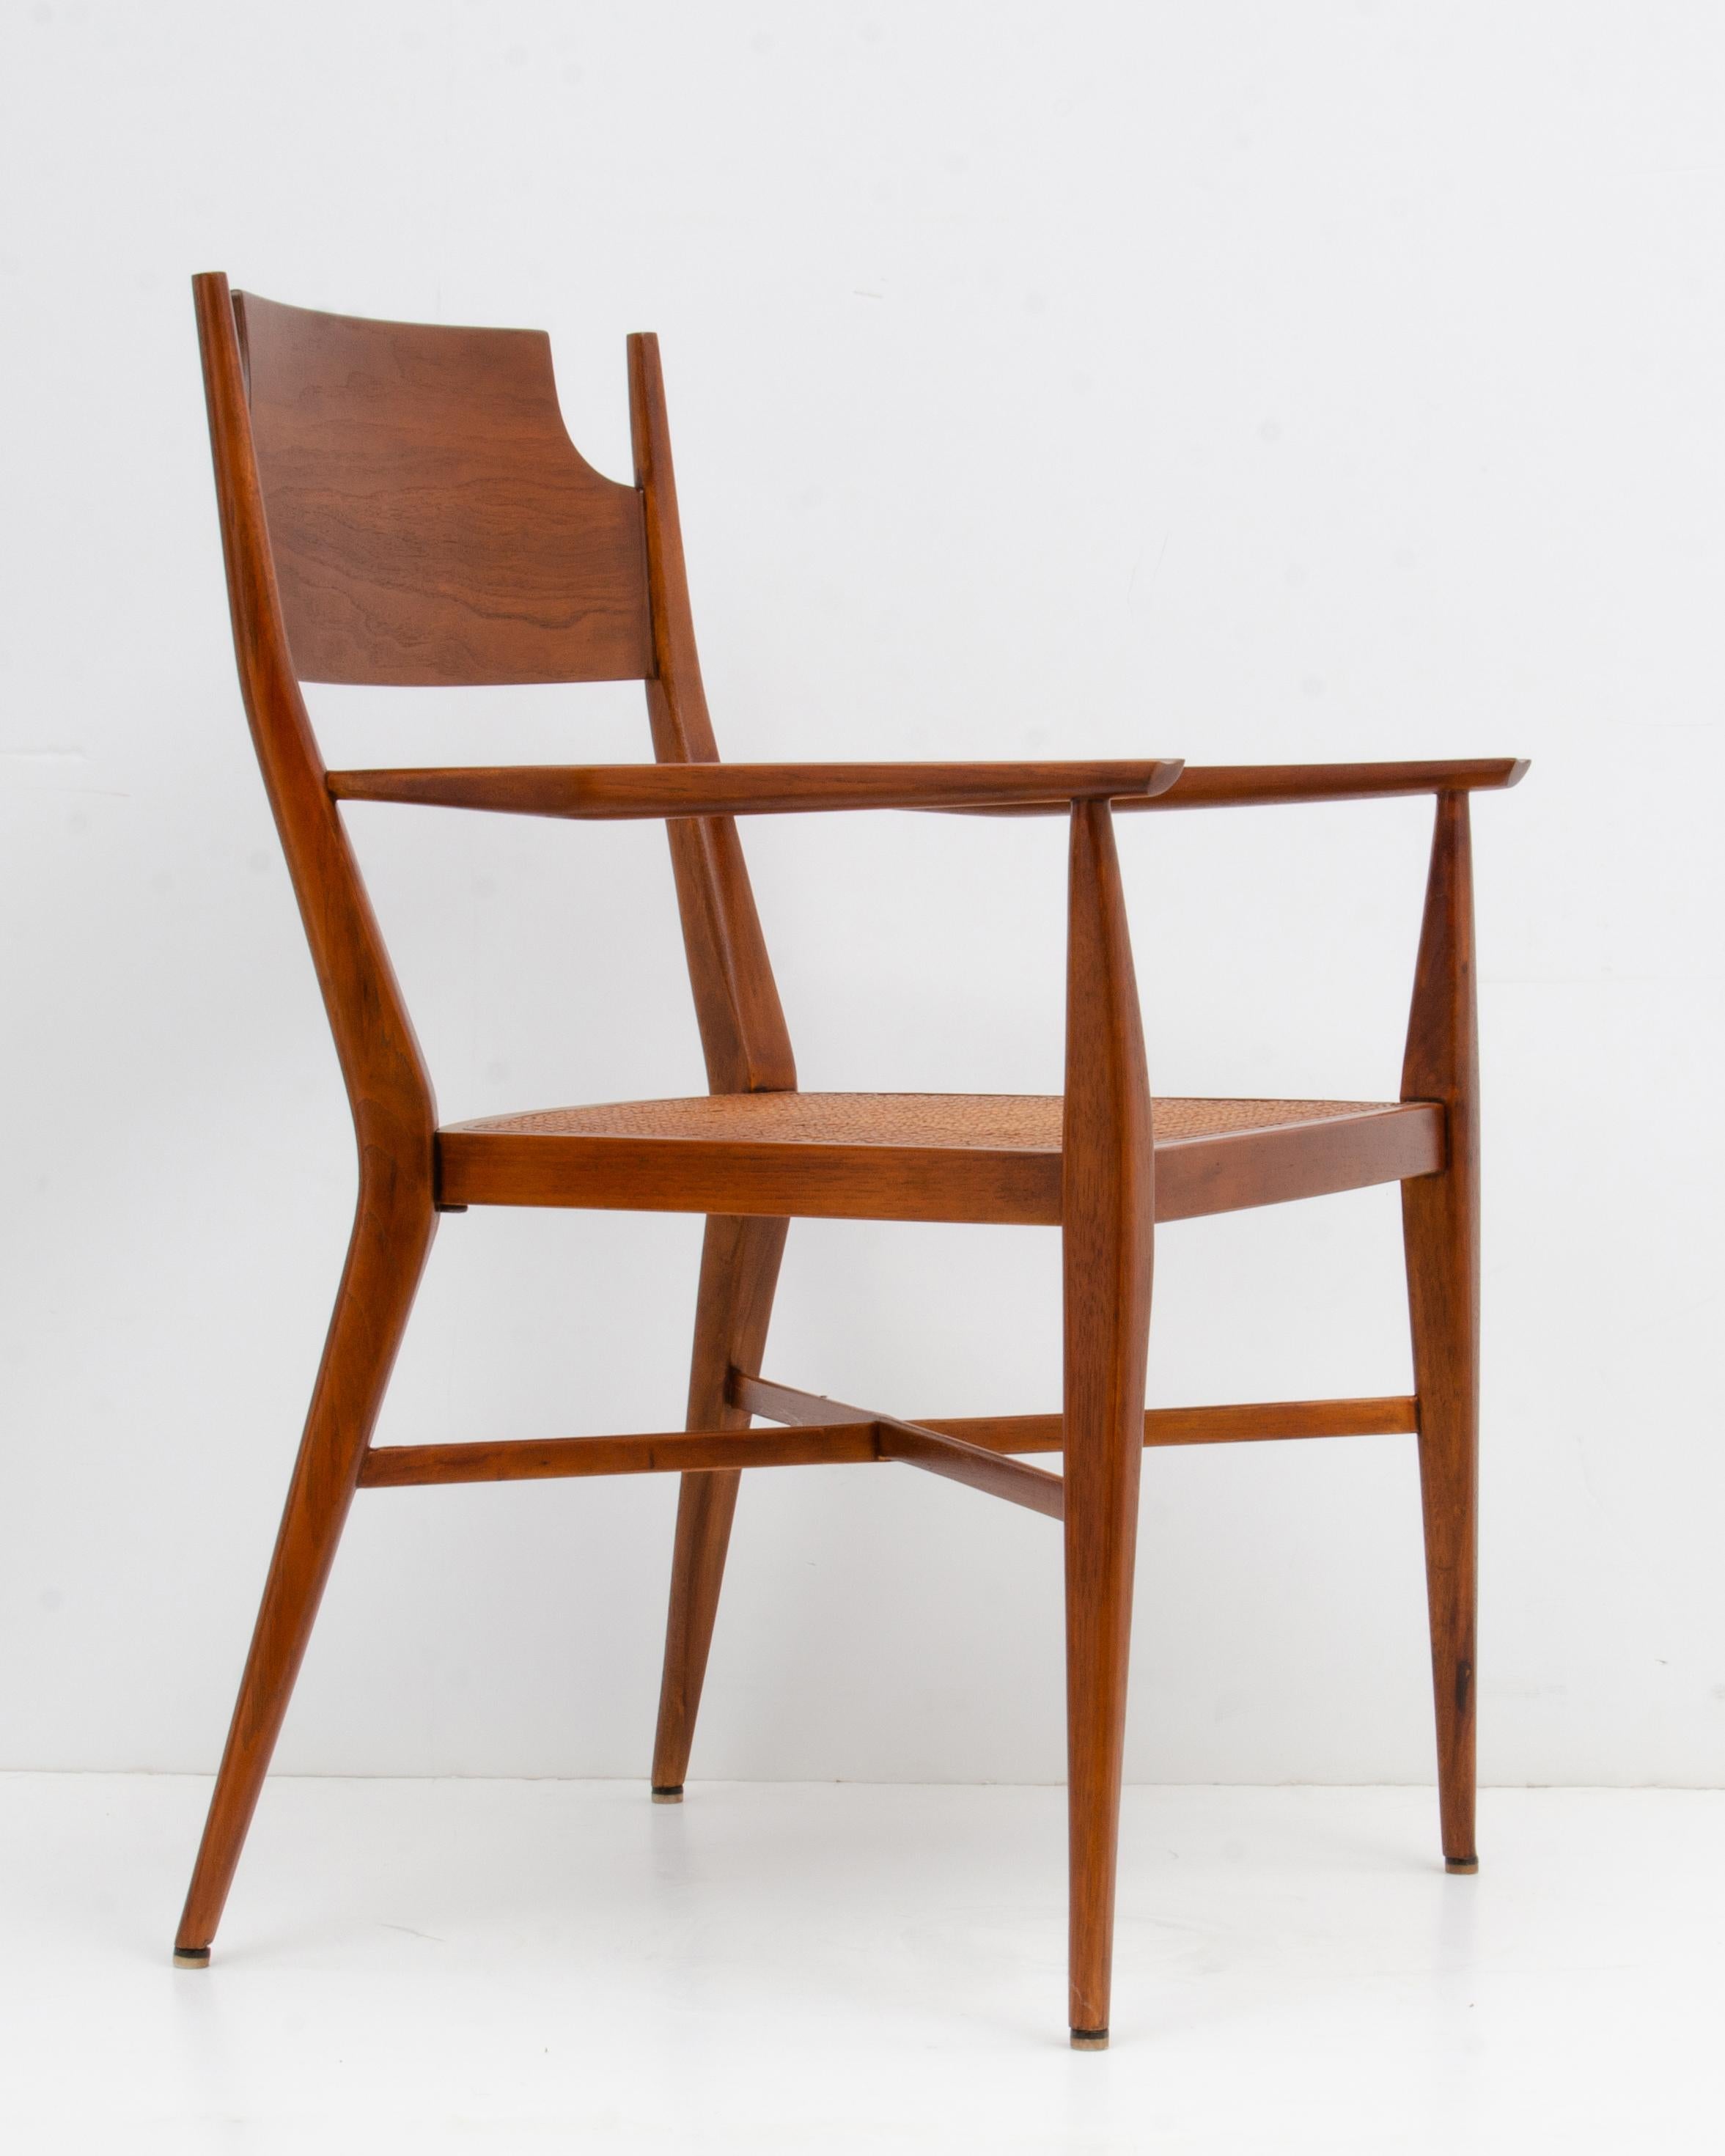 A fabulous 1950s Paul McCobb for Calvin Furniture walnut armchair. Fully marked. Meticulously crafted. Professionally restored. A great design and a really beautiful chair...